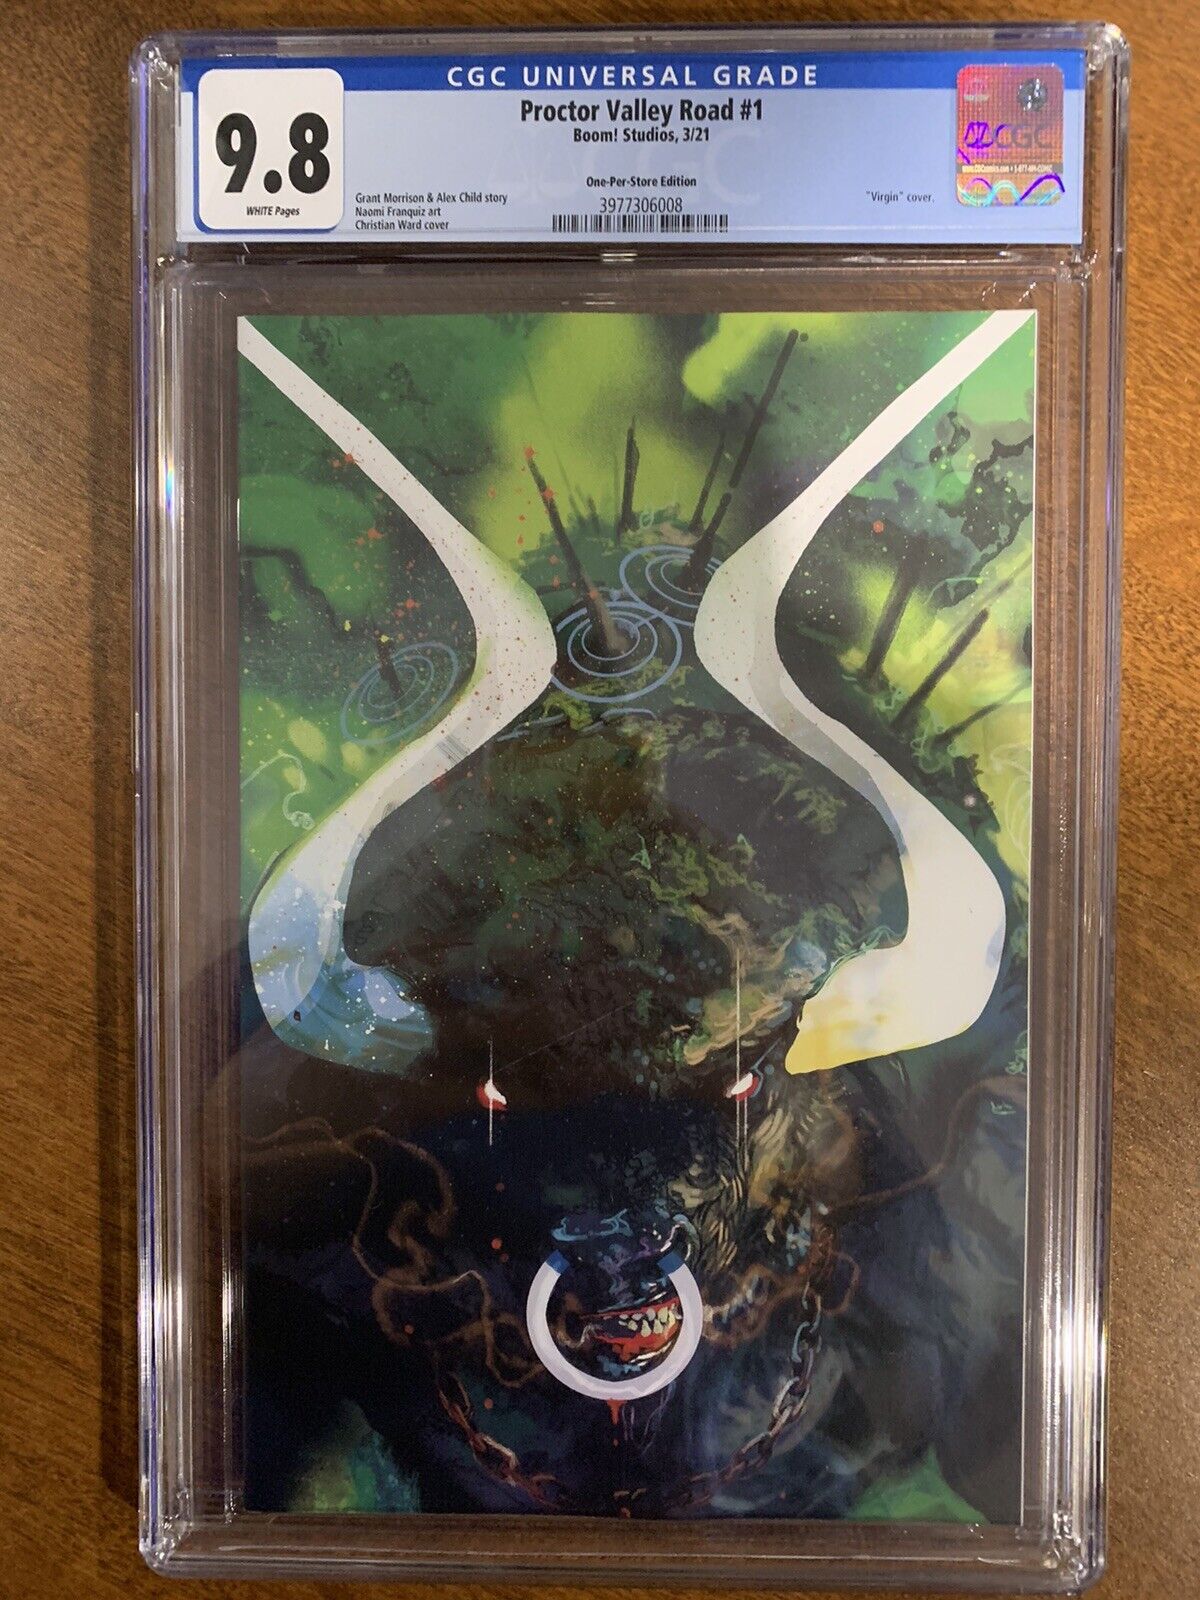 ✨Proctor Valley Road #1 - CGC 9.8 - One Per Store Thank You Variant - Virgin